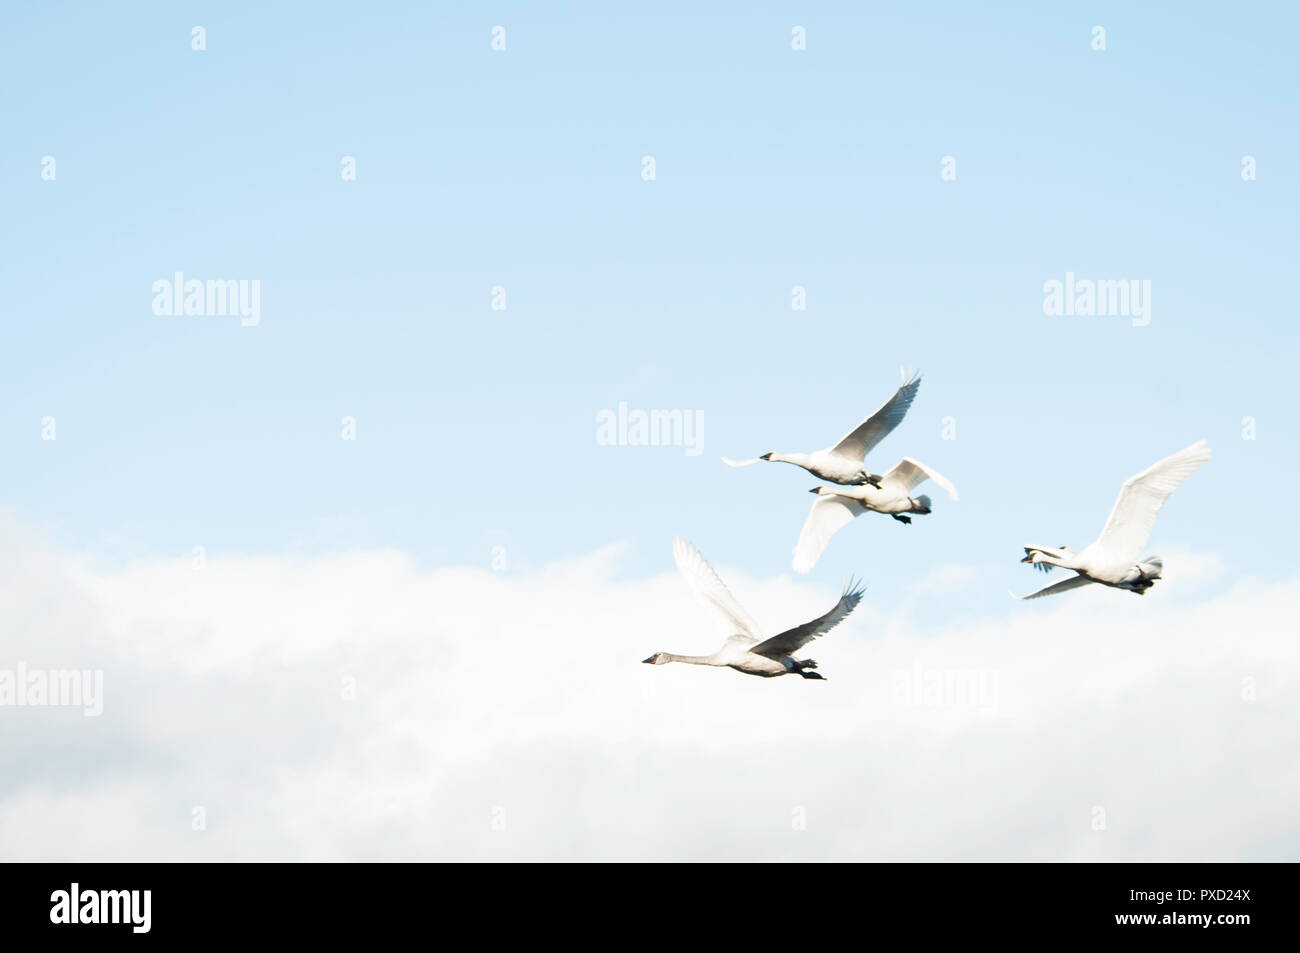 A small flock of Trumpeter swans in flight against a blue sky Stock Photo